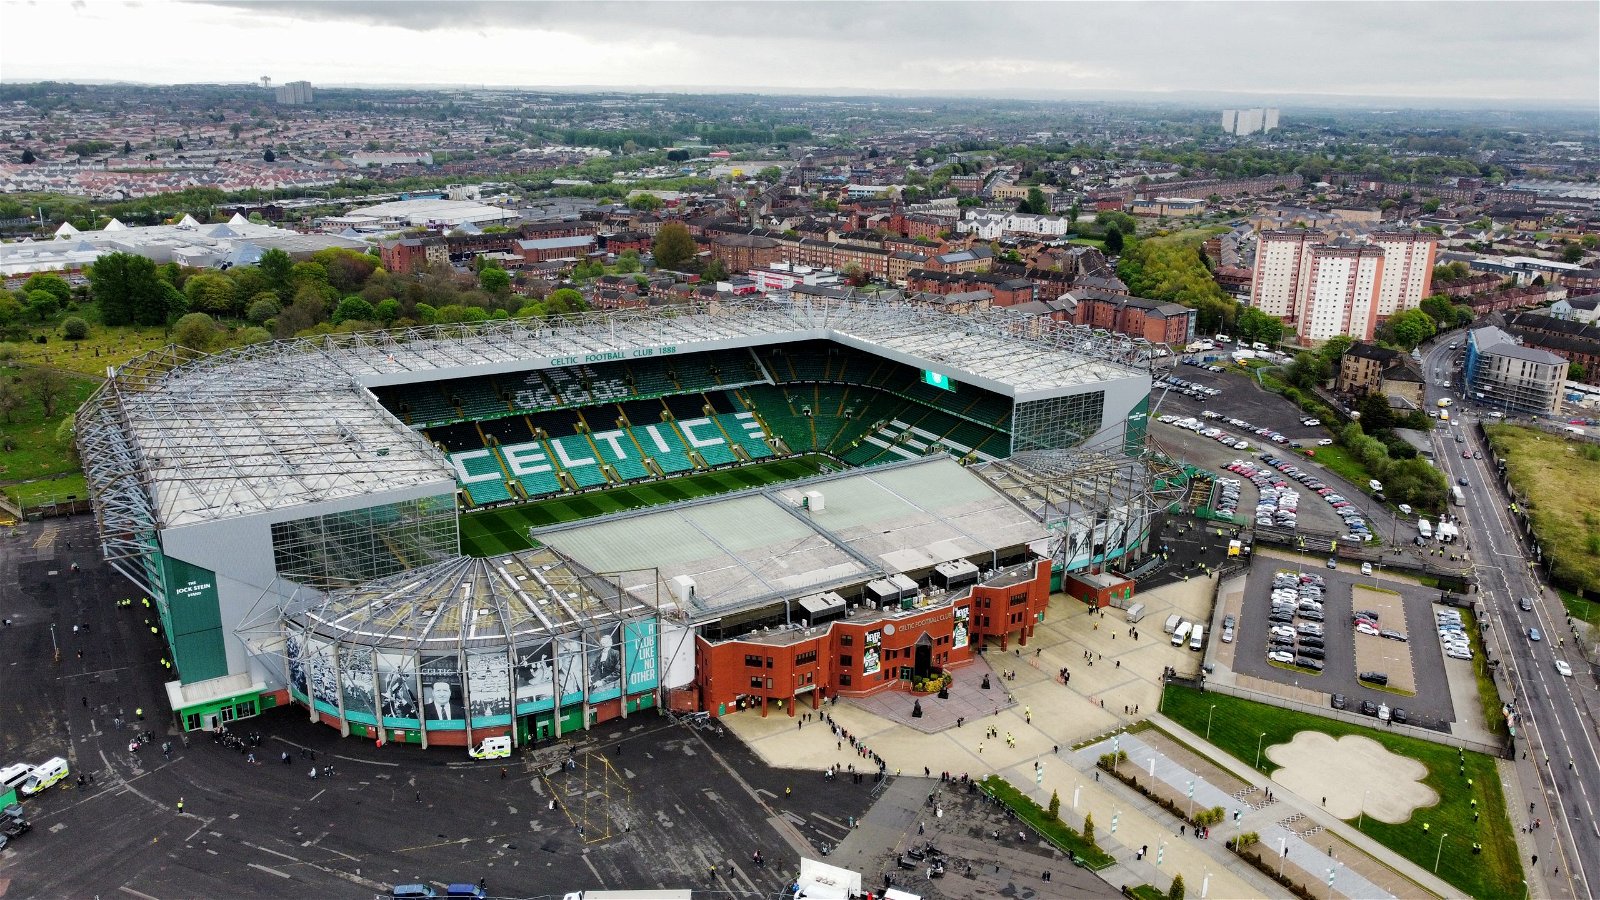 A new look for the new season at Celtic Park